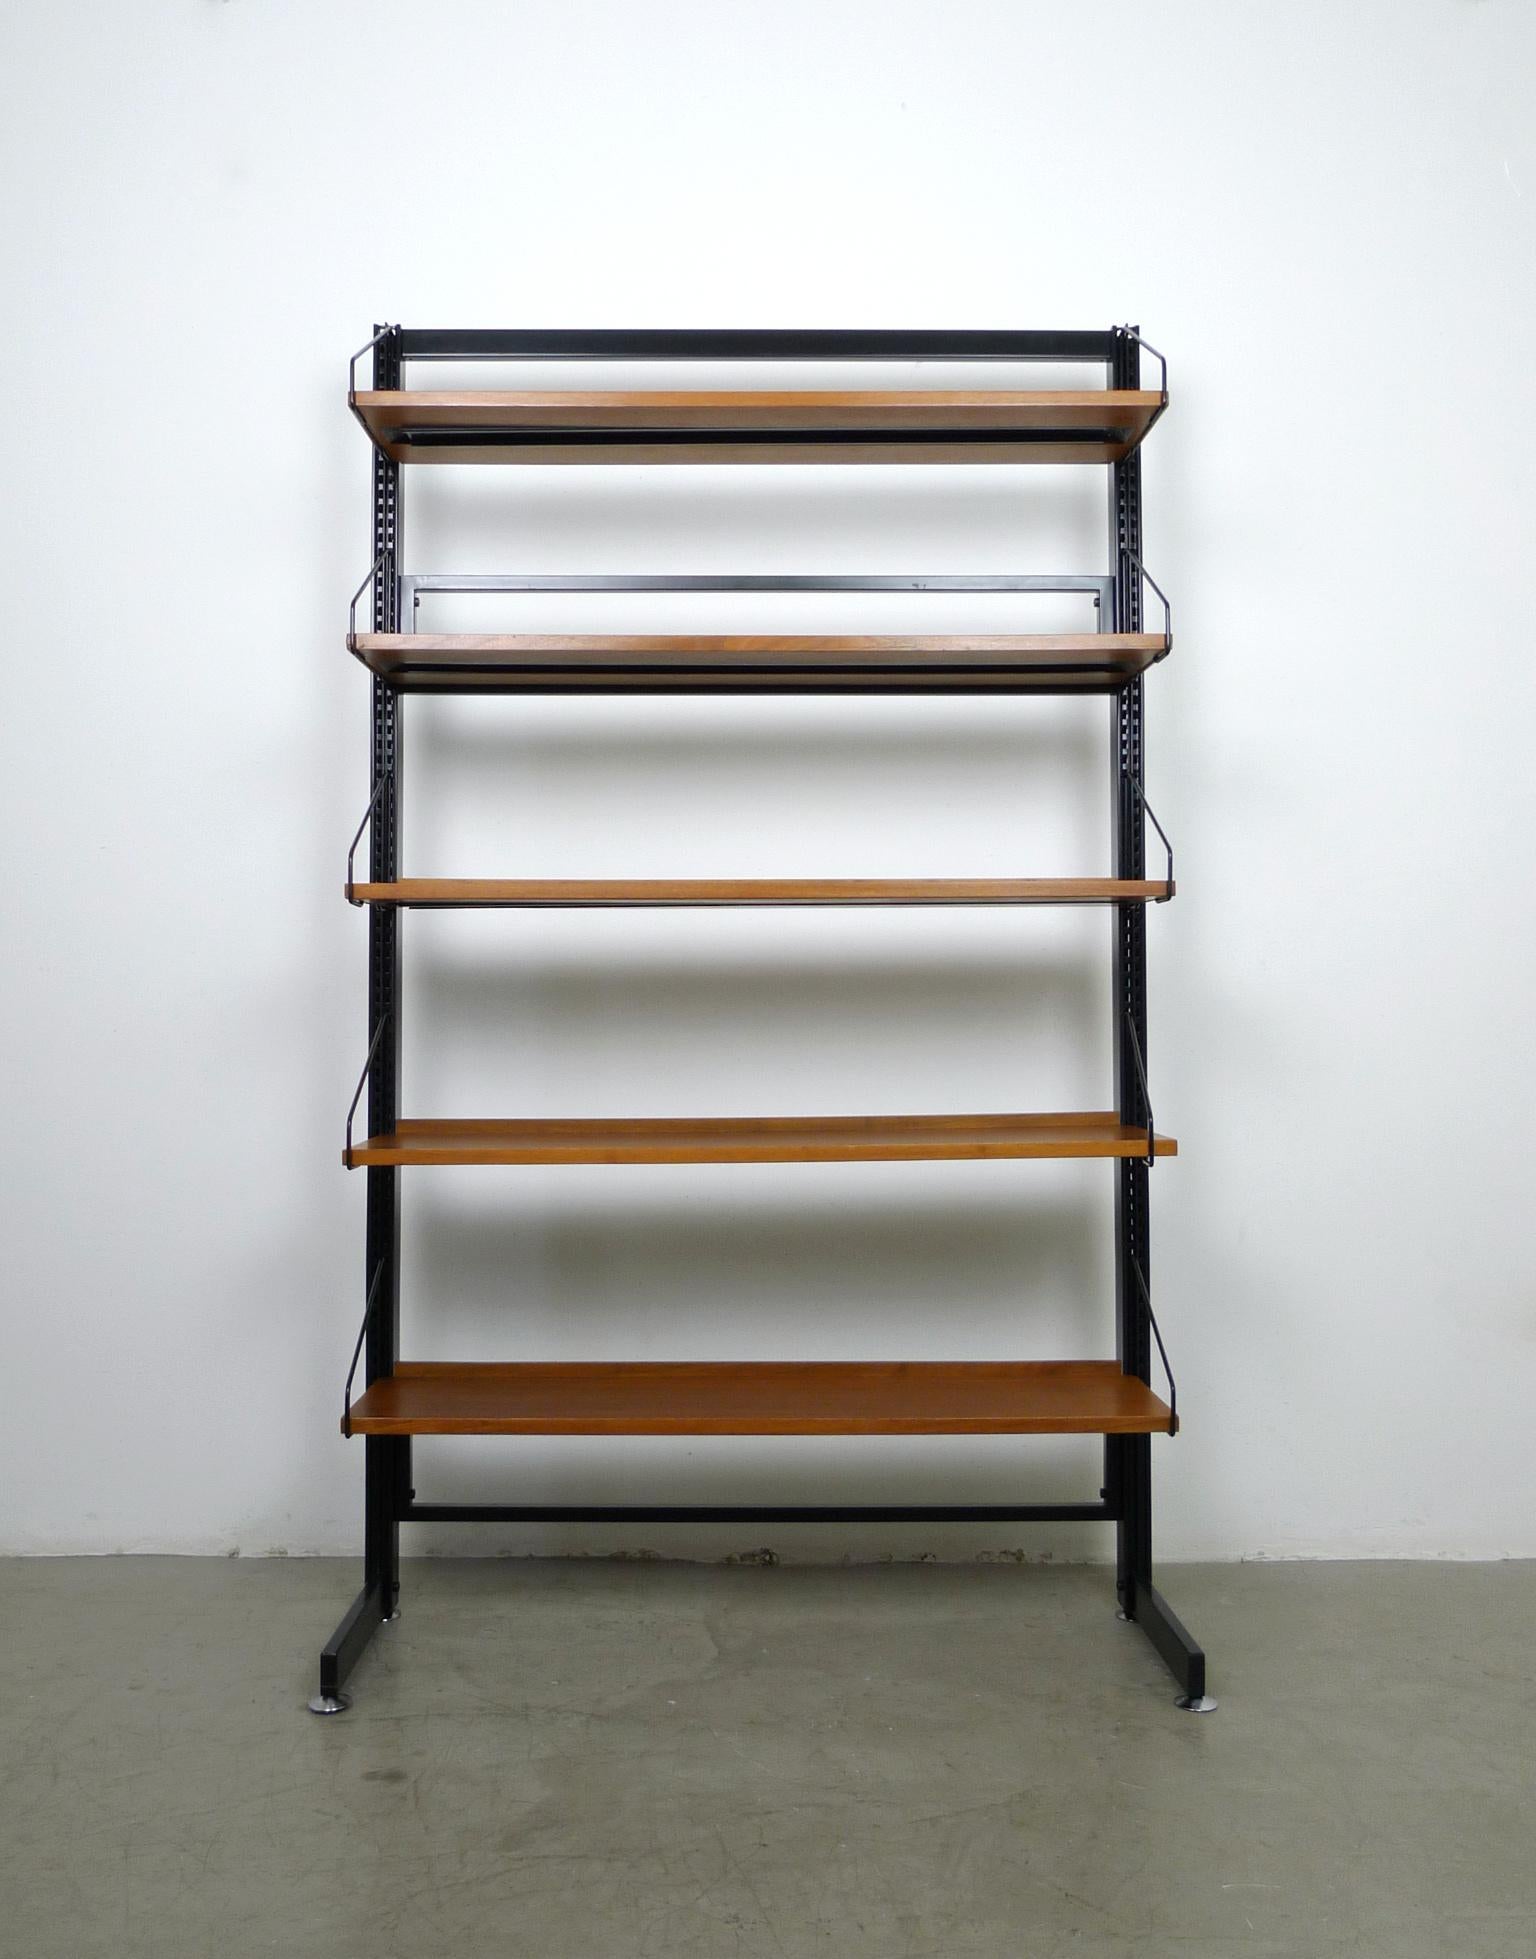 Lacquered Freestanding Shelving Unit with Walnut Shelves, Germany, 1960s